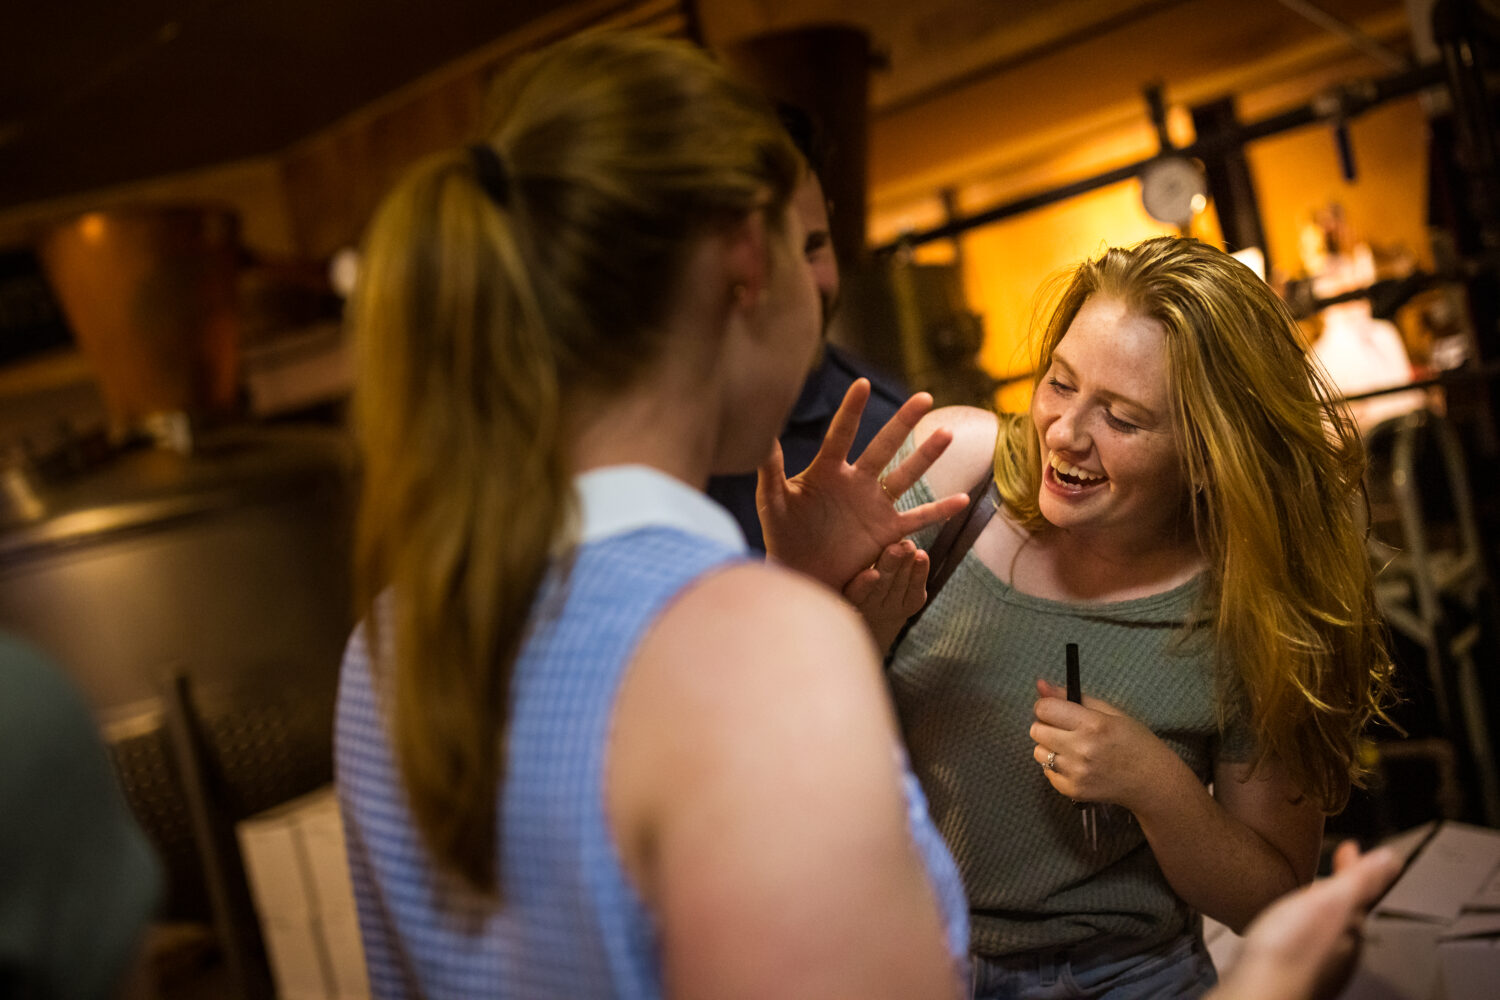 lisa rhinehart, captures this fun image of the girl showing off her ring to her friends at her surprise engagement party after her surprise proposal